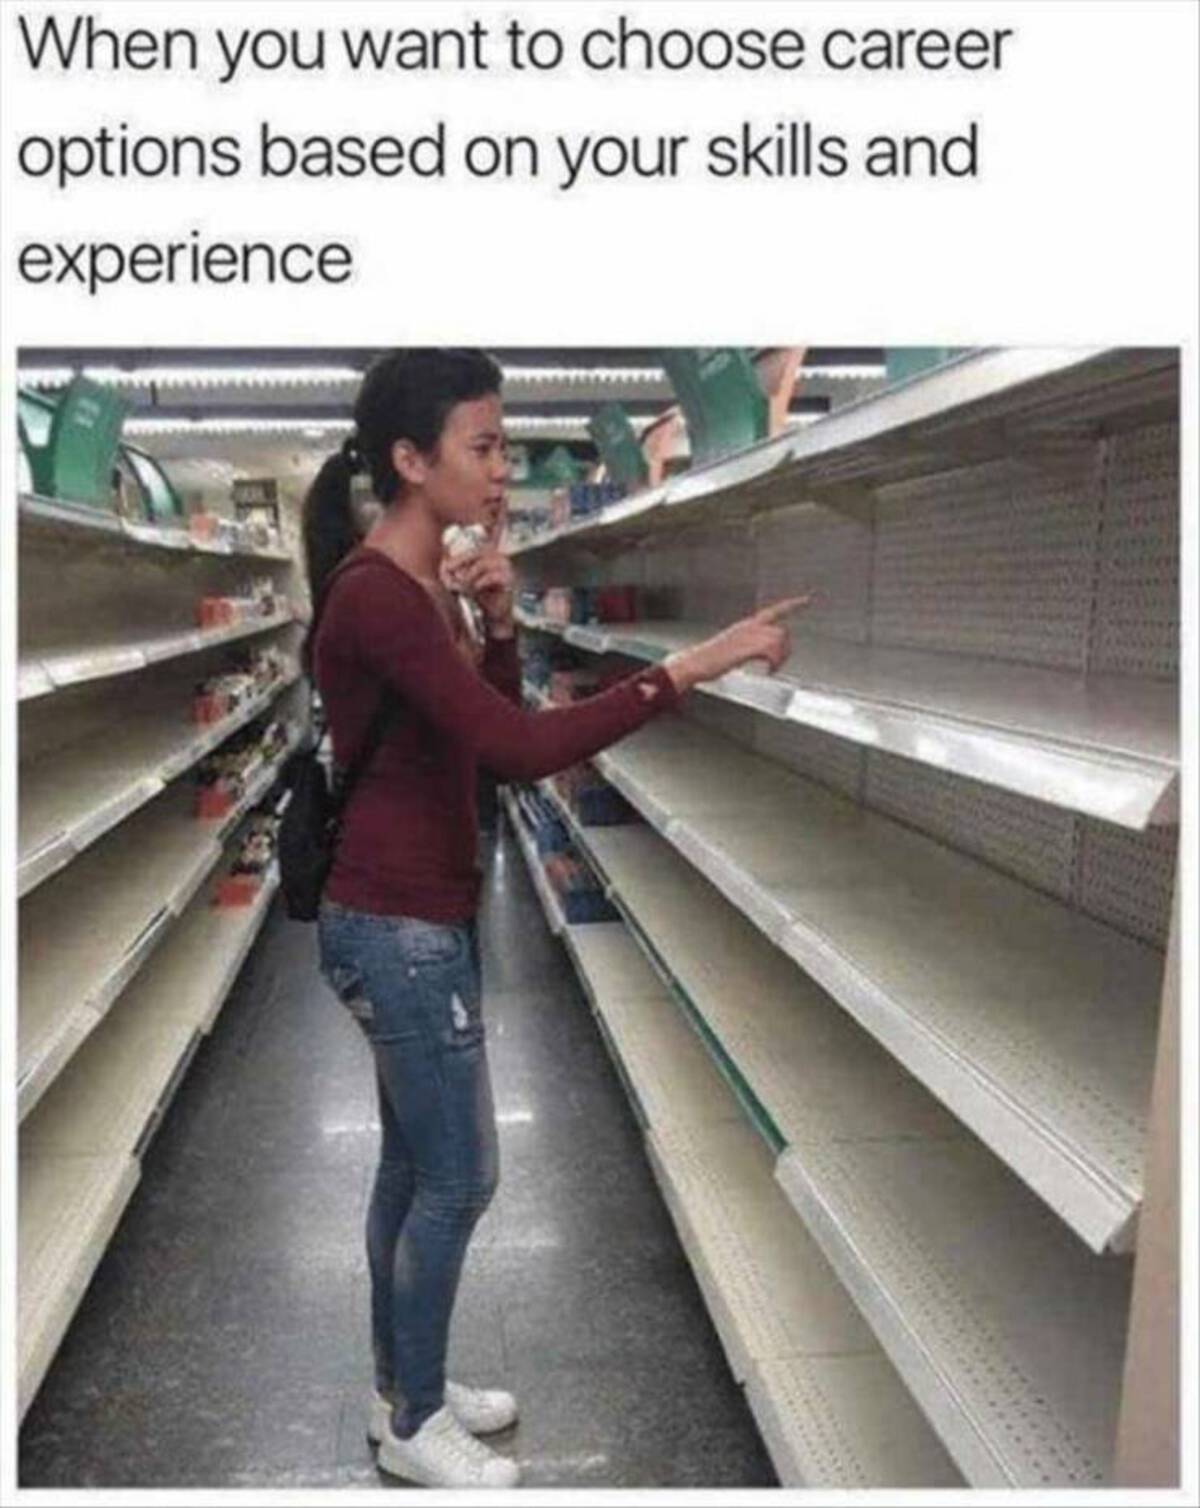 job skills meme - When you want to choose career options based on your skills and experience